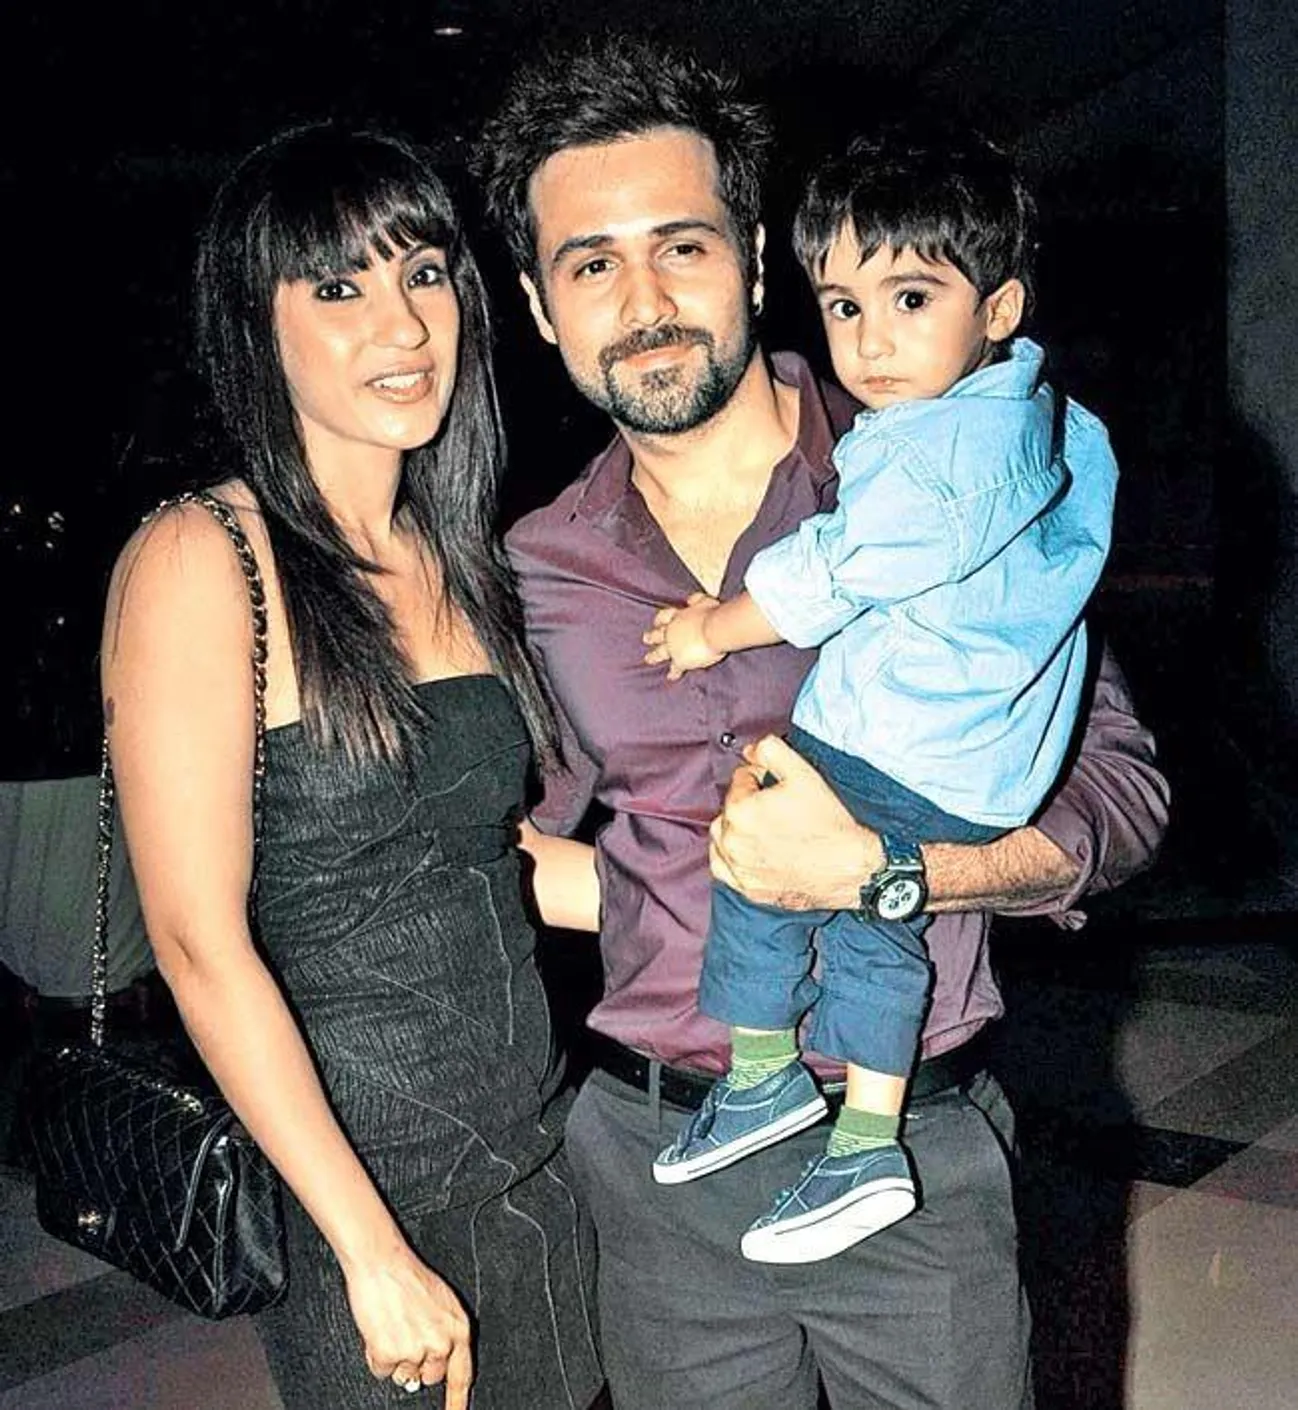 Have you seen these adorable candid photos of Emraan Hashmi with his wife  and son?